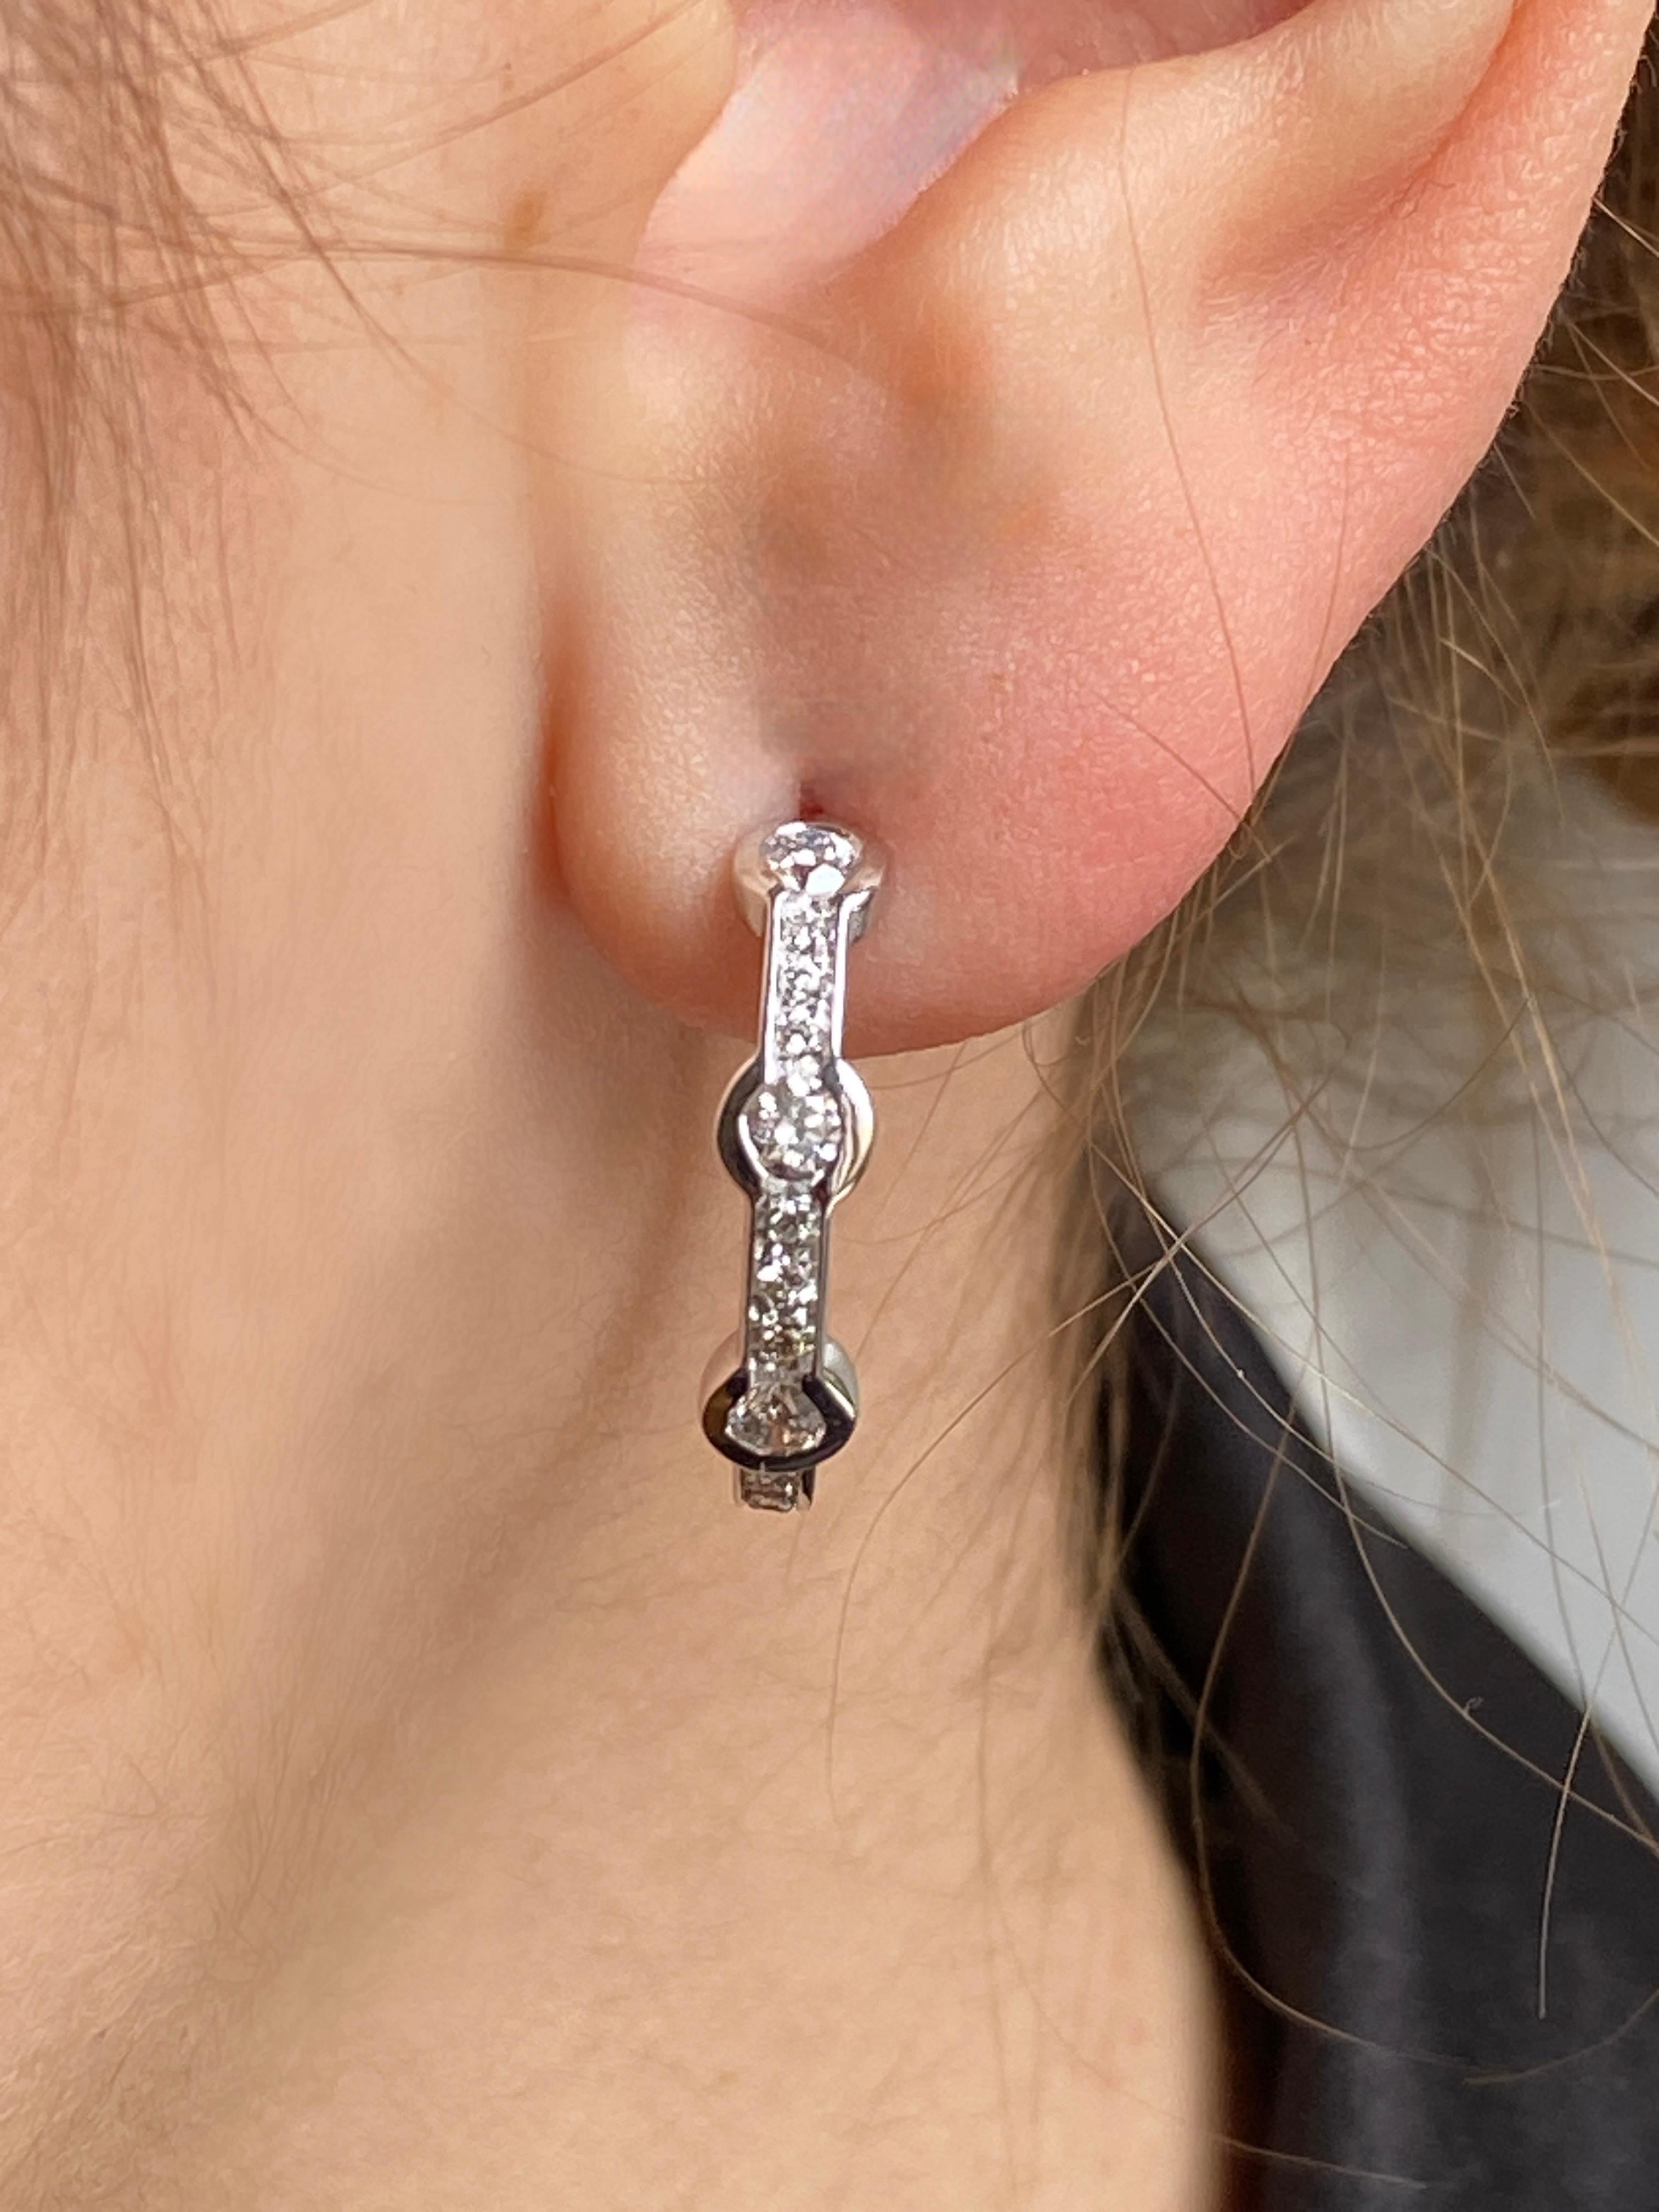 Rossella Ugolini hoop earrings, crafted in 18K white gold and adorned with 0.60 carats of stunning white diamonds. These earrings are handcrafted in Italy and measure 2 cm in diameter. Each earring features a design of three large Diamonds